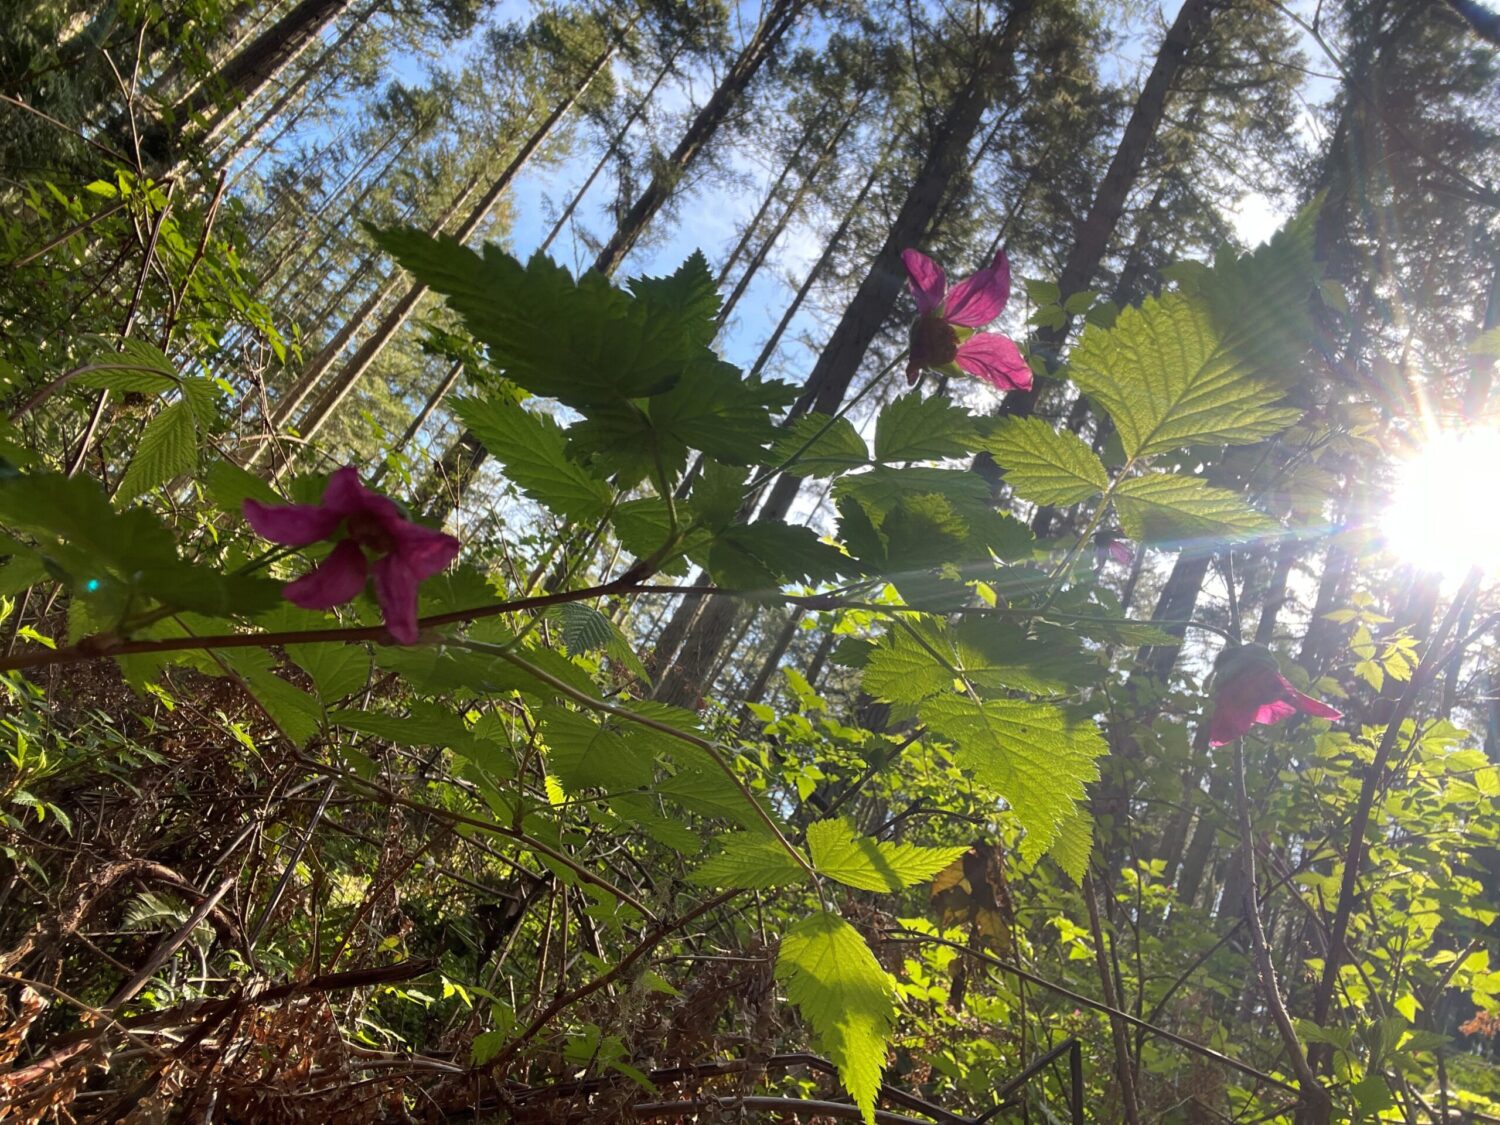 Sun shining through forest onto salmonberry busy with pink budding flowers